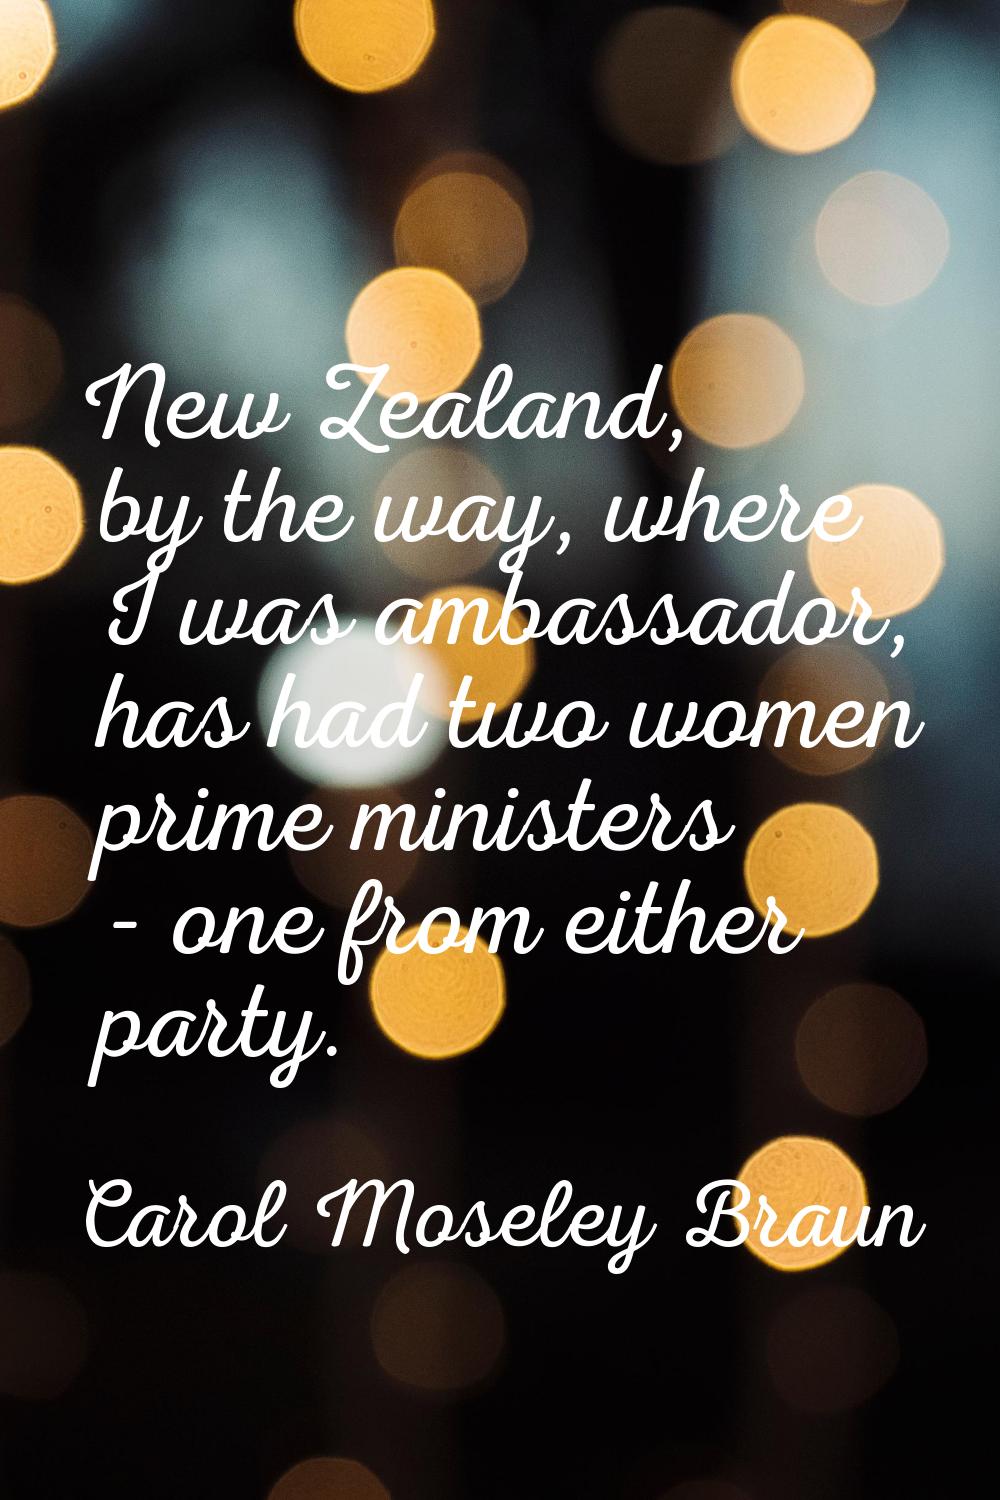 New Zealand, by the way, where I was ambassador, has had two women prime ministers - one from eithe